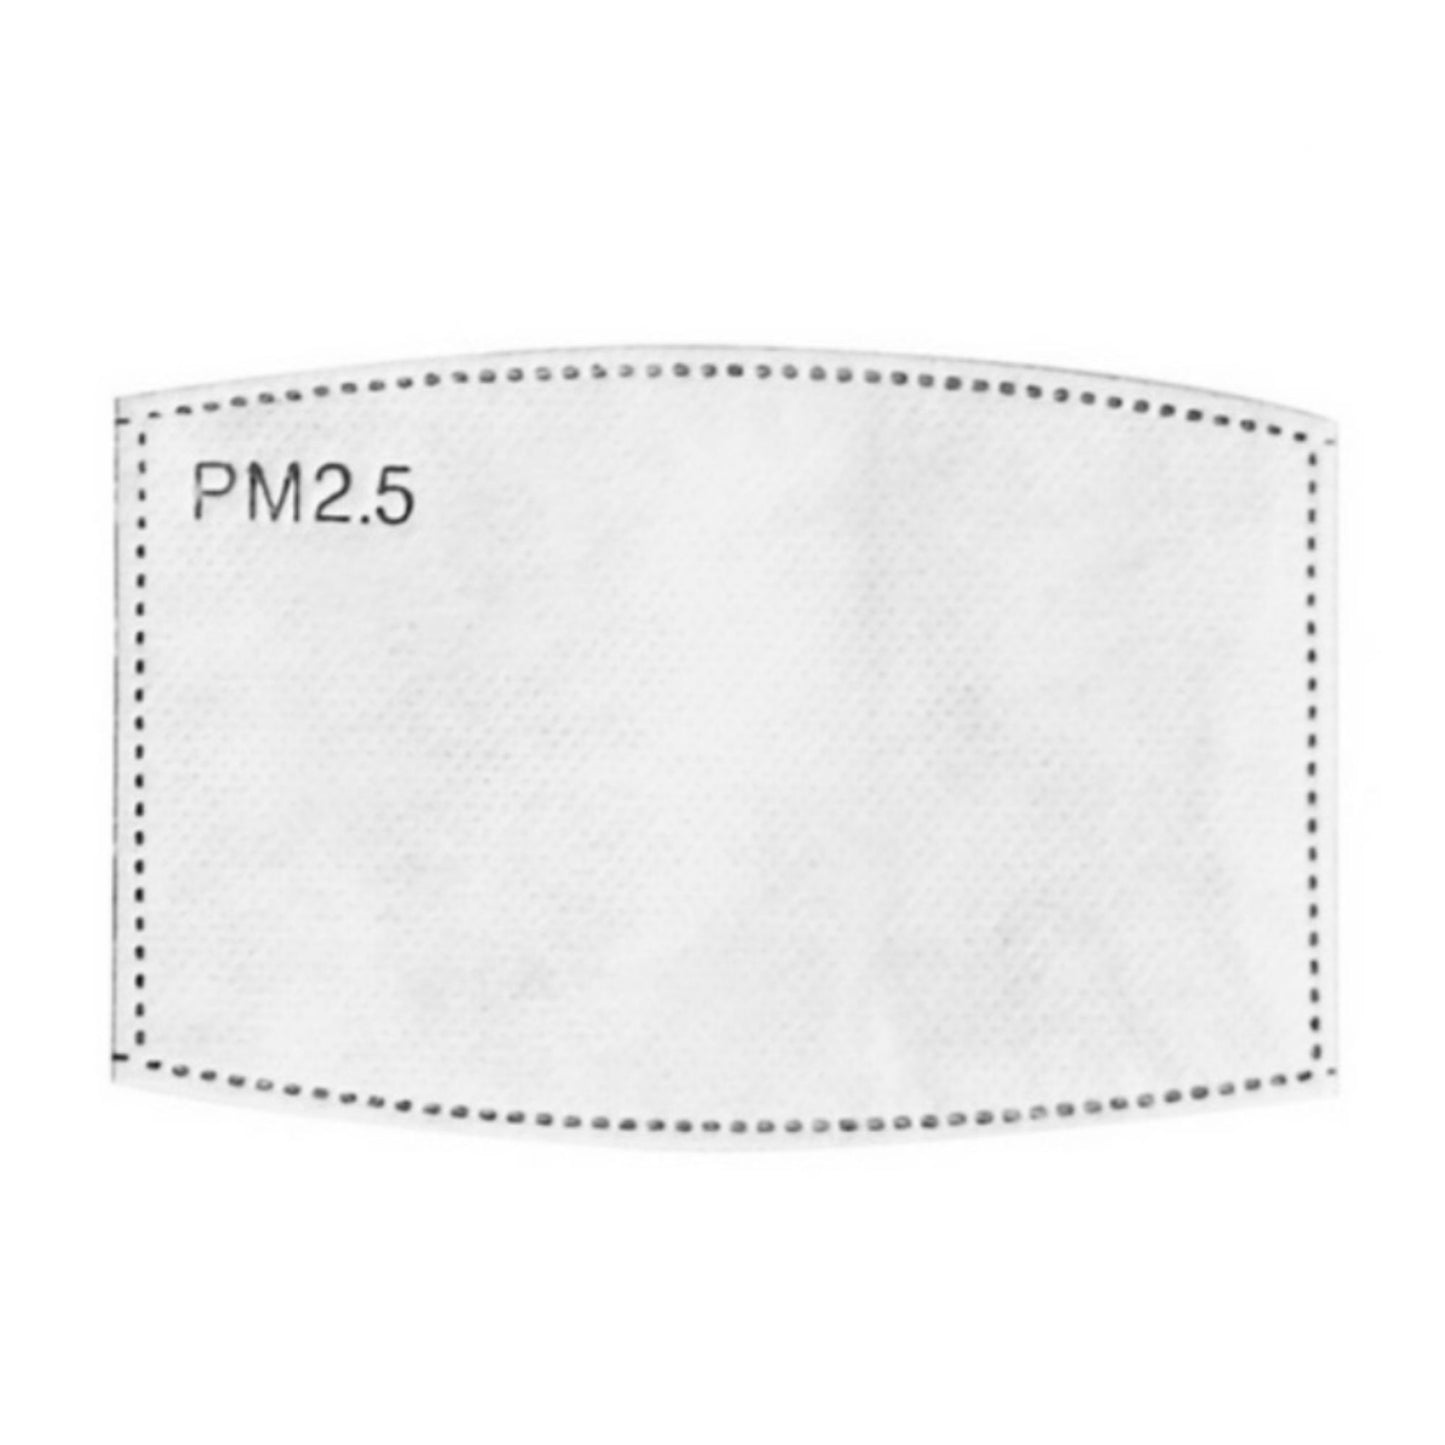 PM 2.5 Filter Inserts (Adult) - Face Mask